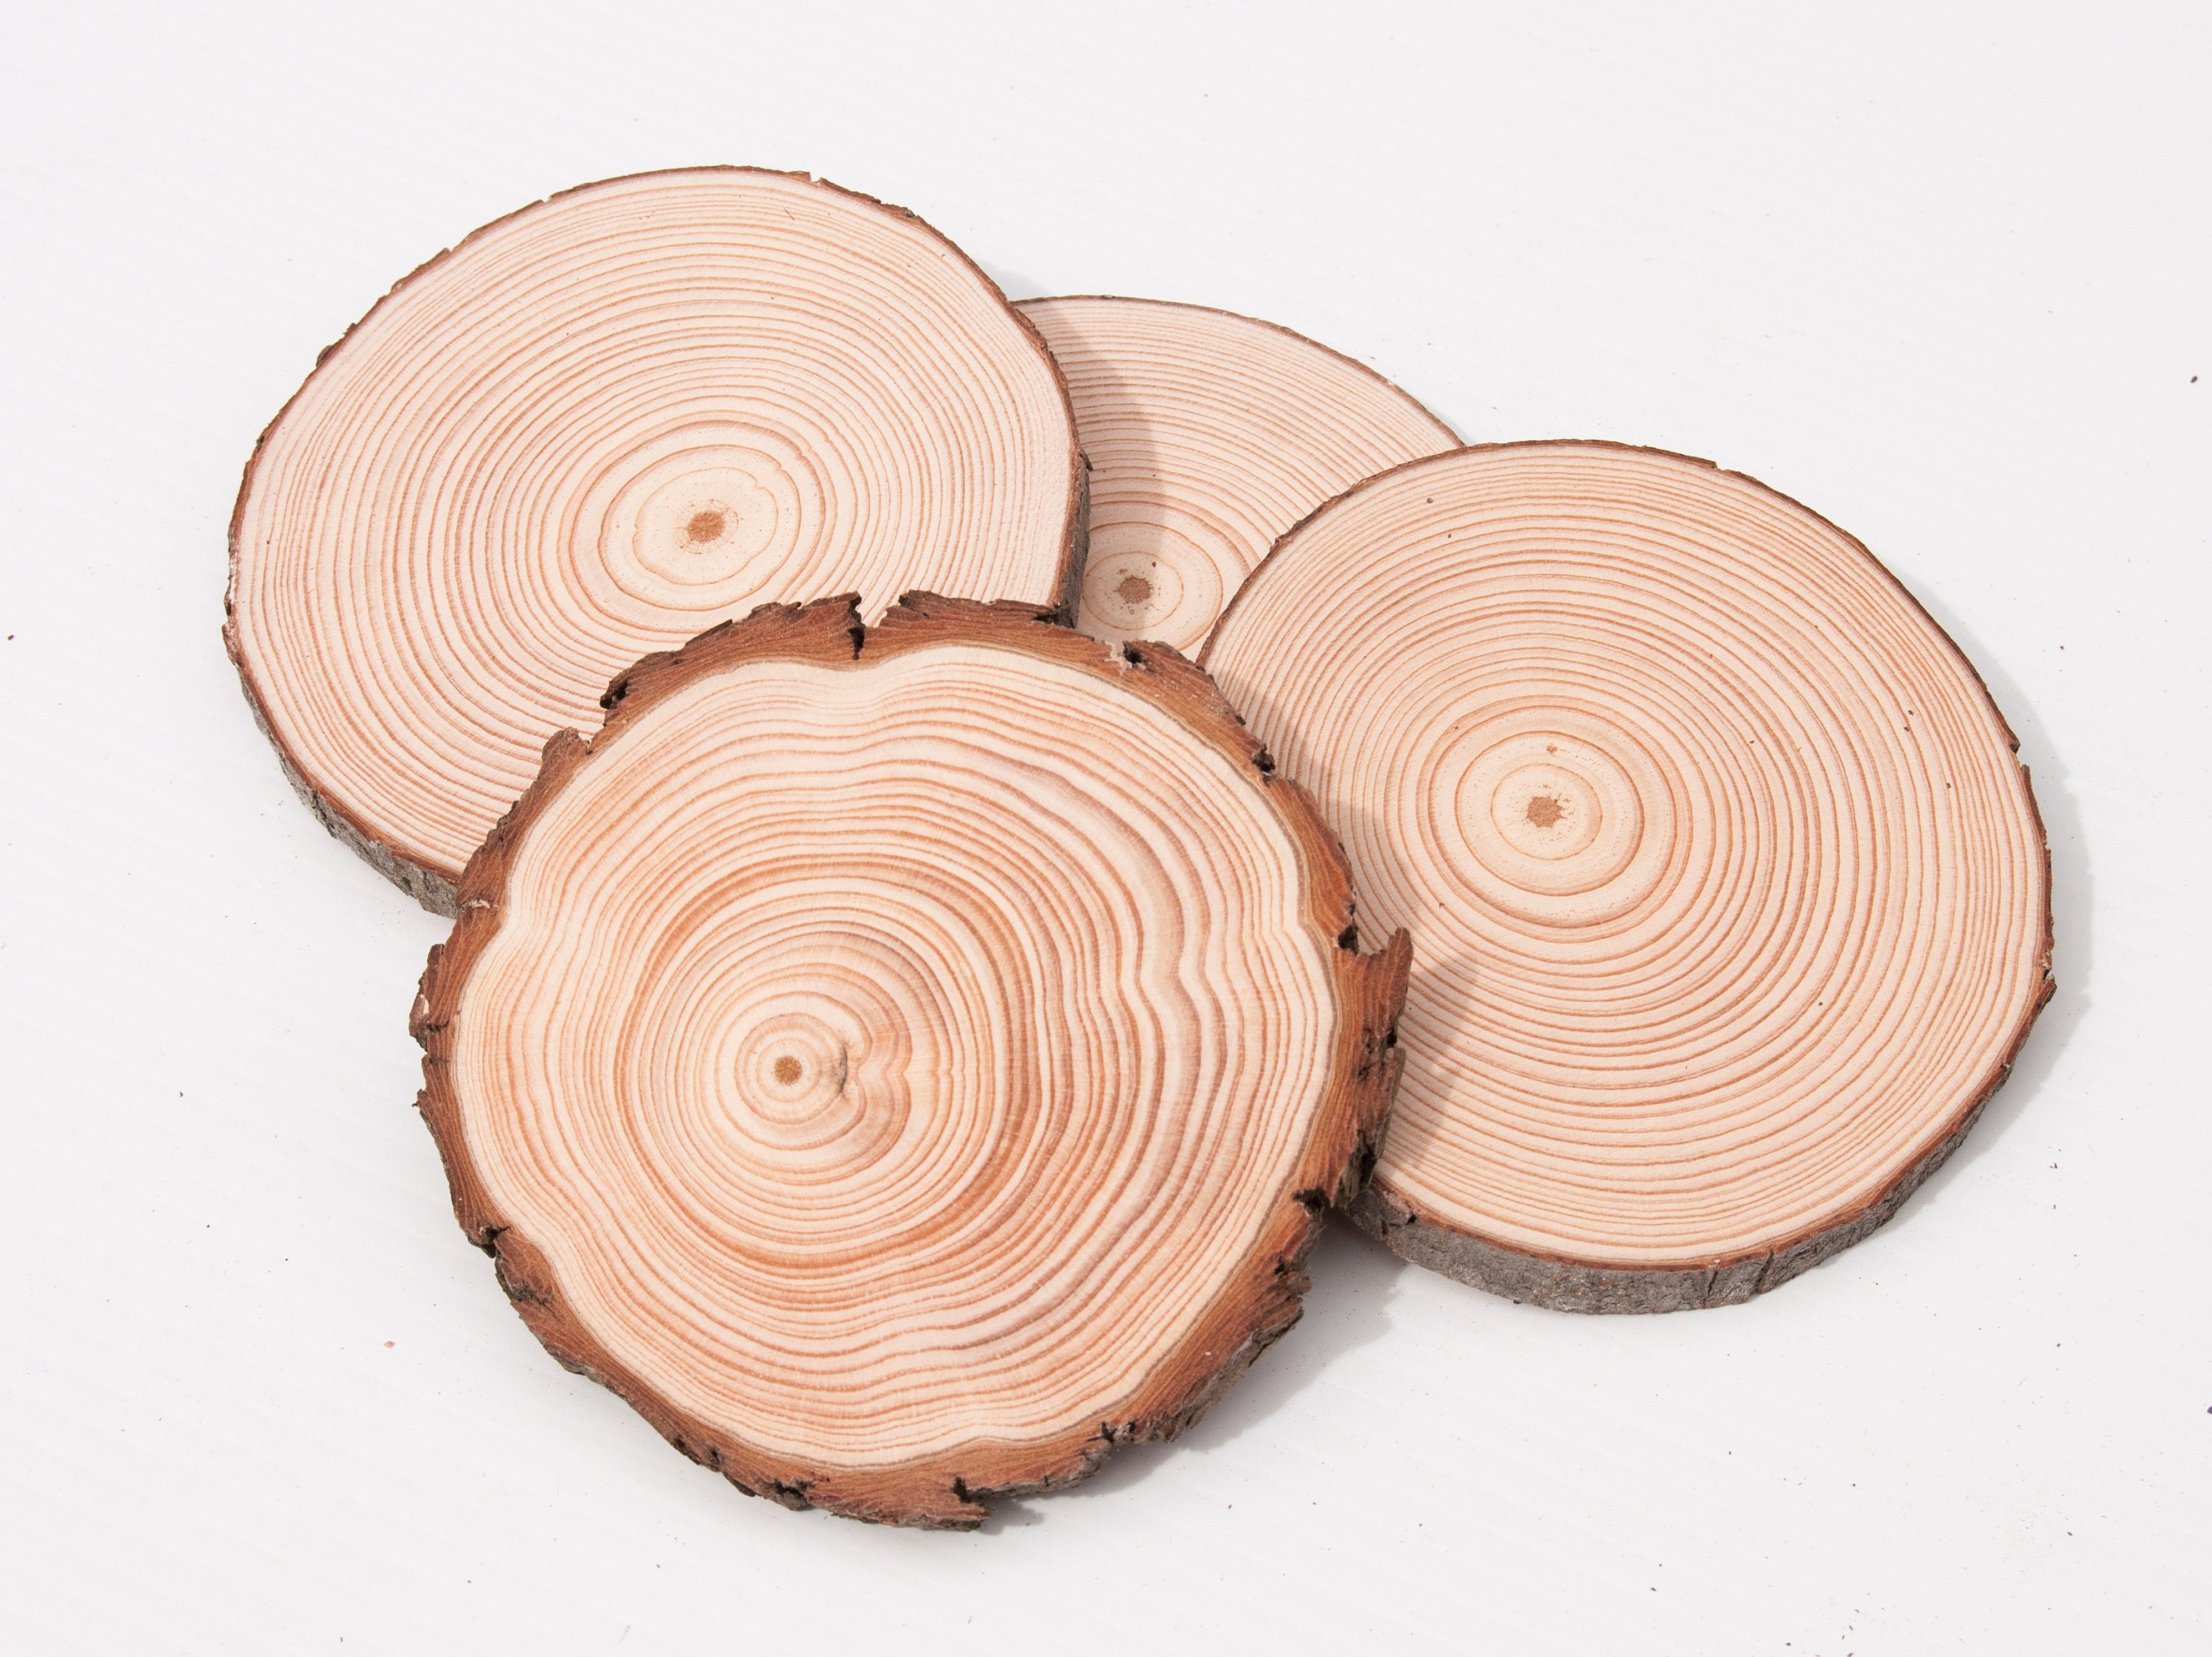 10 Pack 12 14 Cm Wood Slices 5 Inch Wood Slices Wood Burning Rustic Wood  Slices Pyrography Wood Wood Slices With Bark 